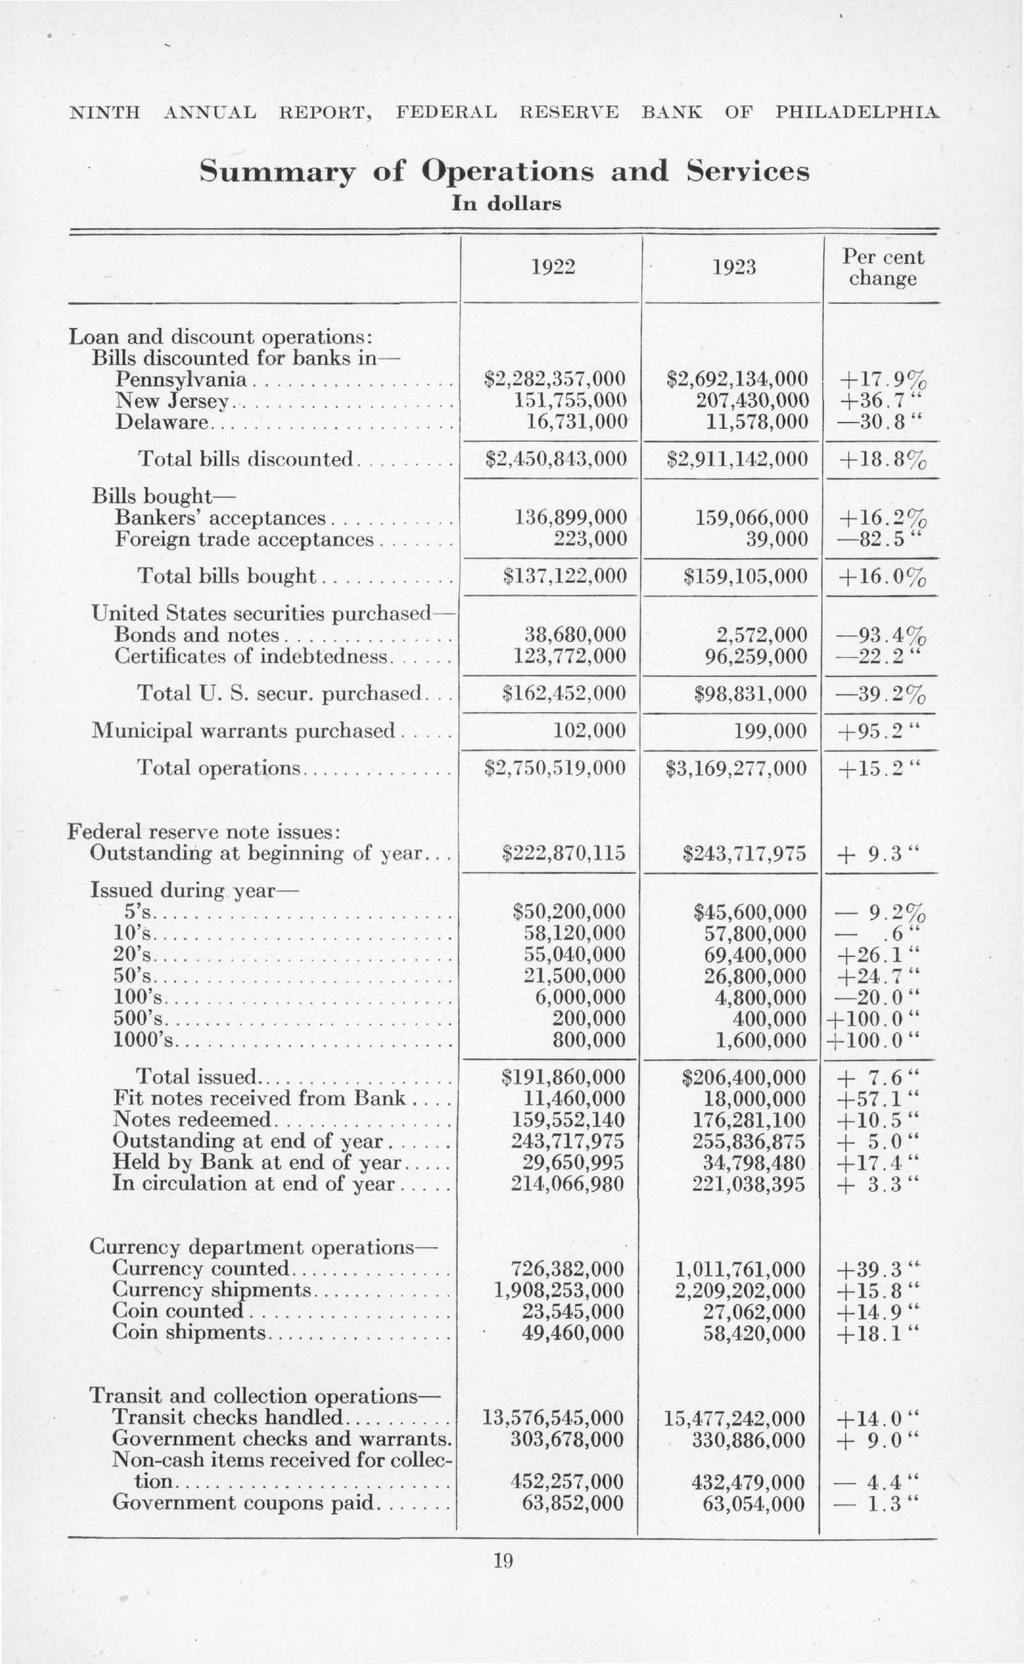 NINTH ANNUAL REPORT, FEDERAL RESERVE BANK OF PHILADELPHIA Summary of Operations and Services In dollars 1922 1923 Per cent change Loan and discount operations: Bills discounted for banks in